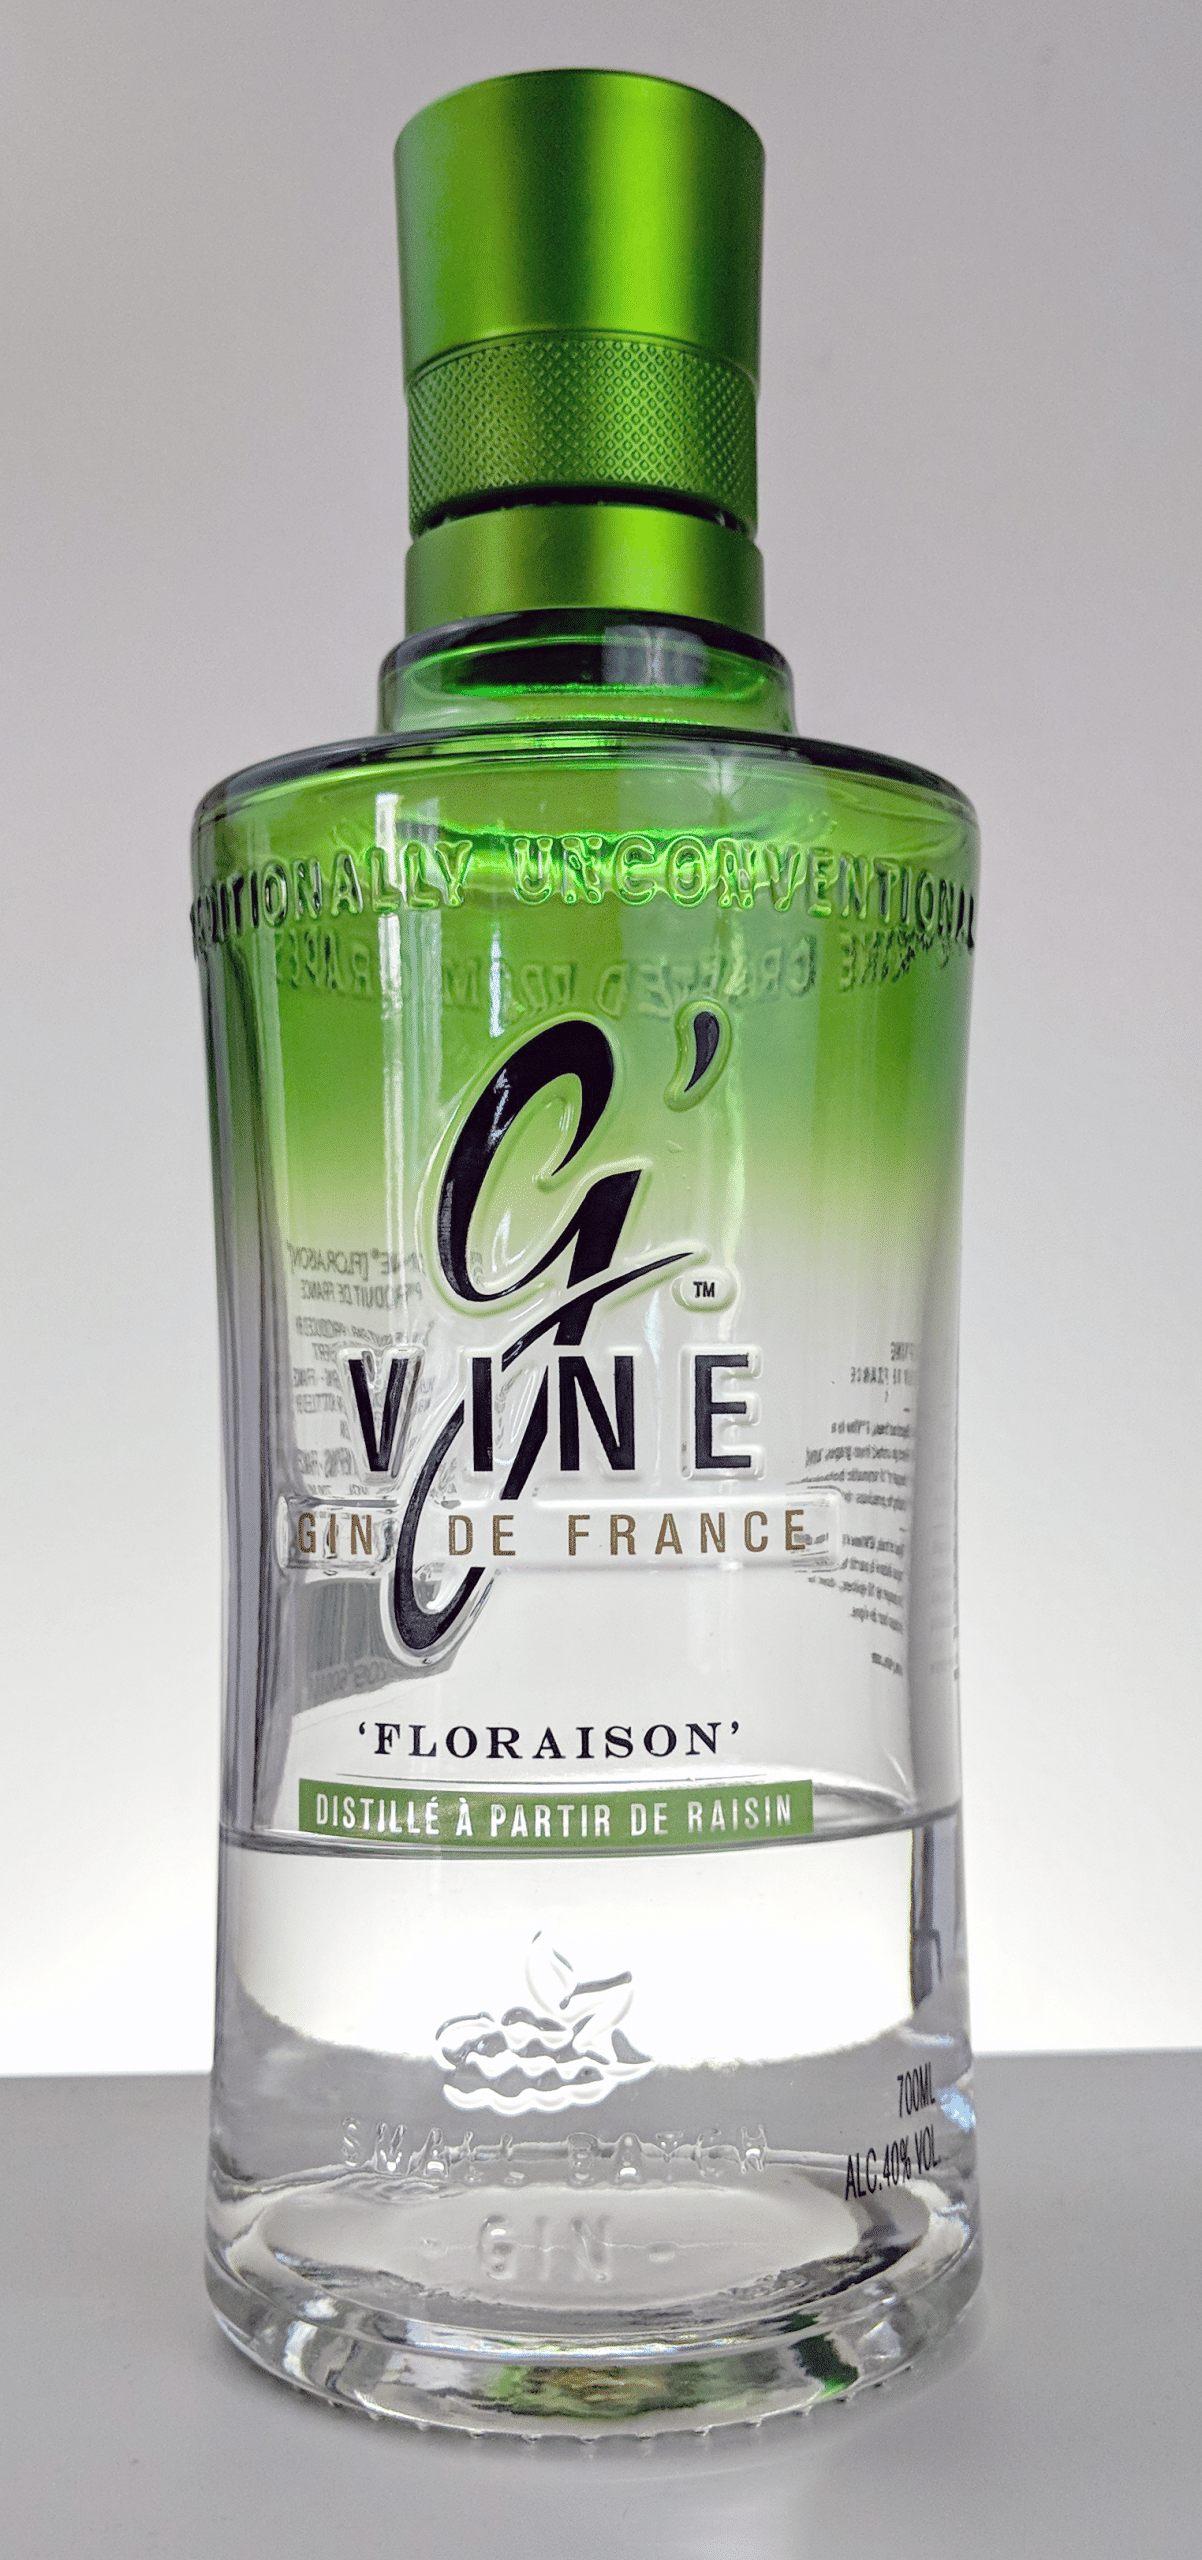 G'vine Floraison | Expert Gin Review and Tasting Notes